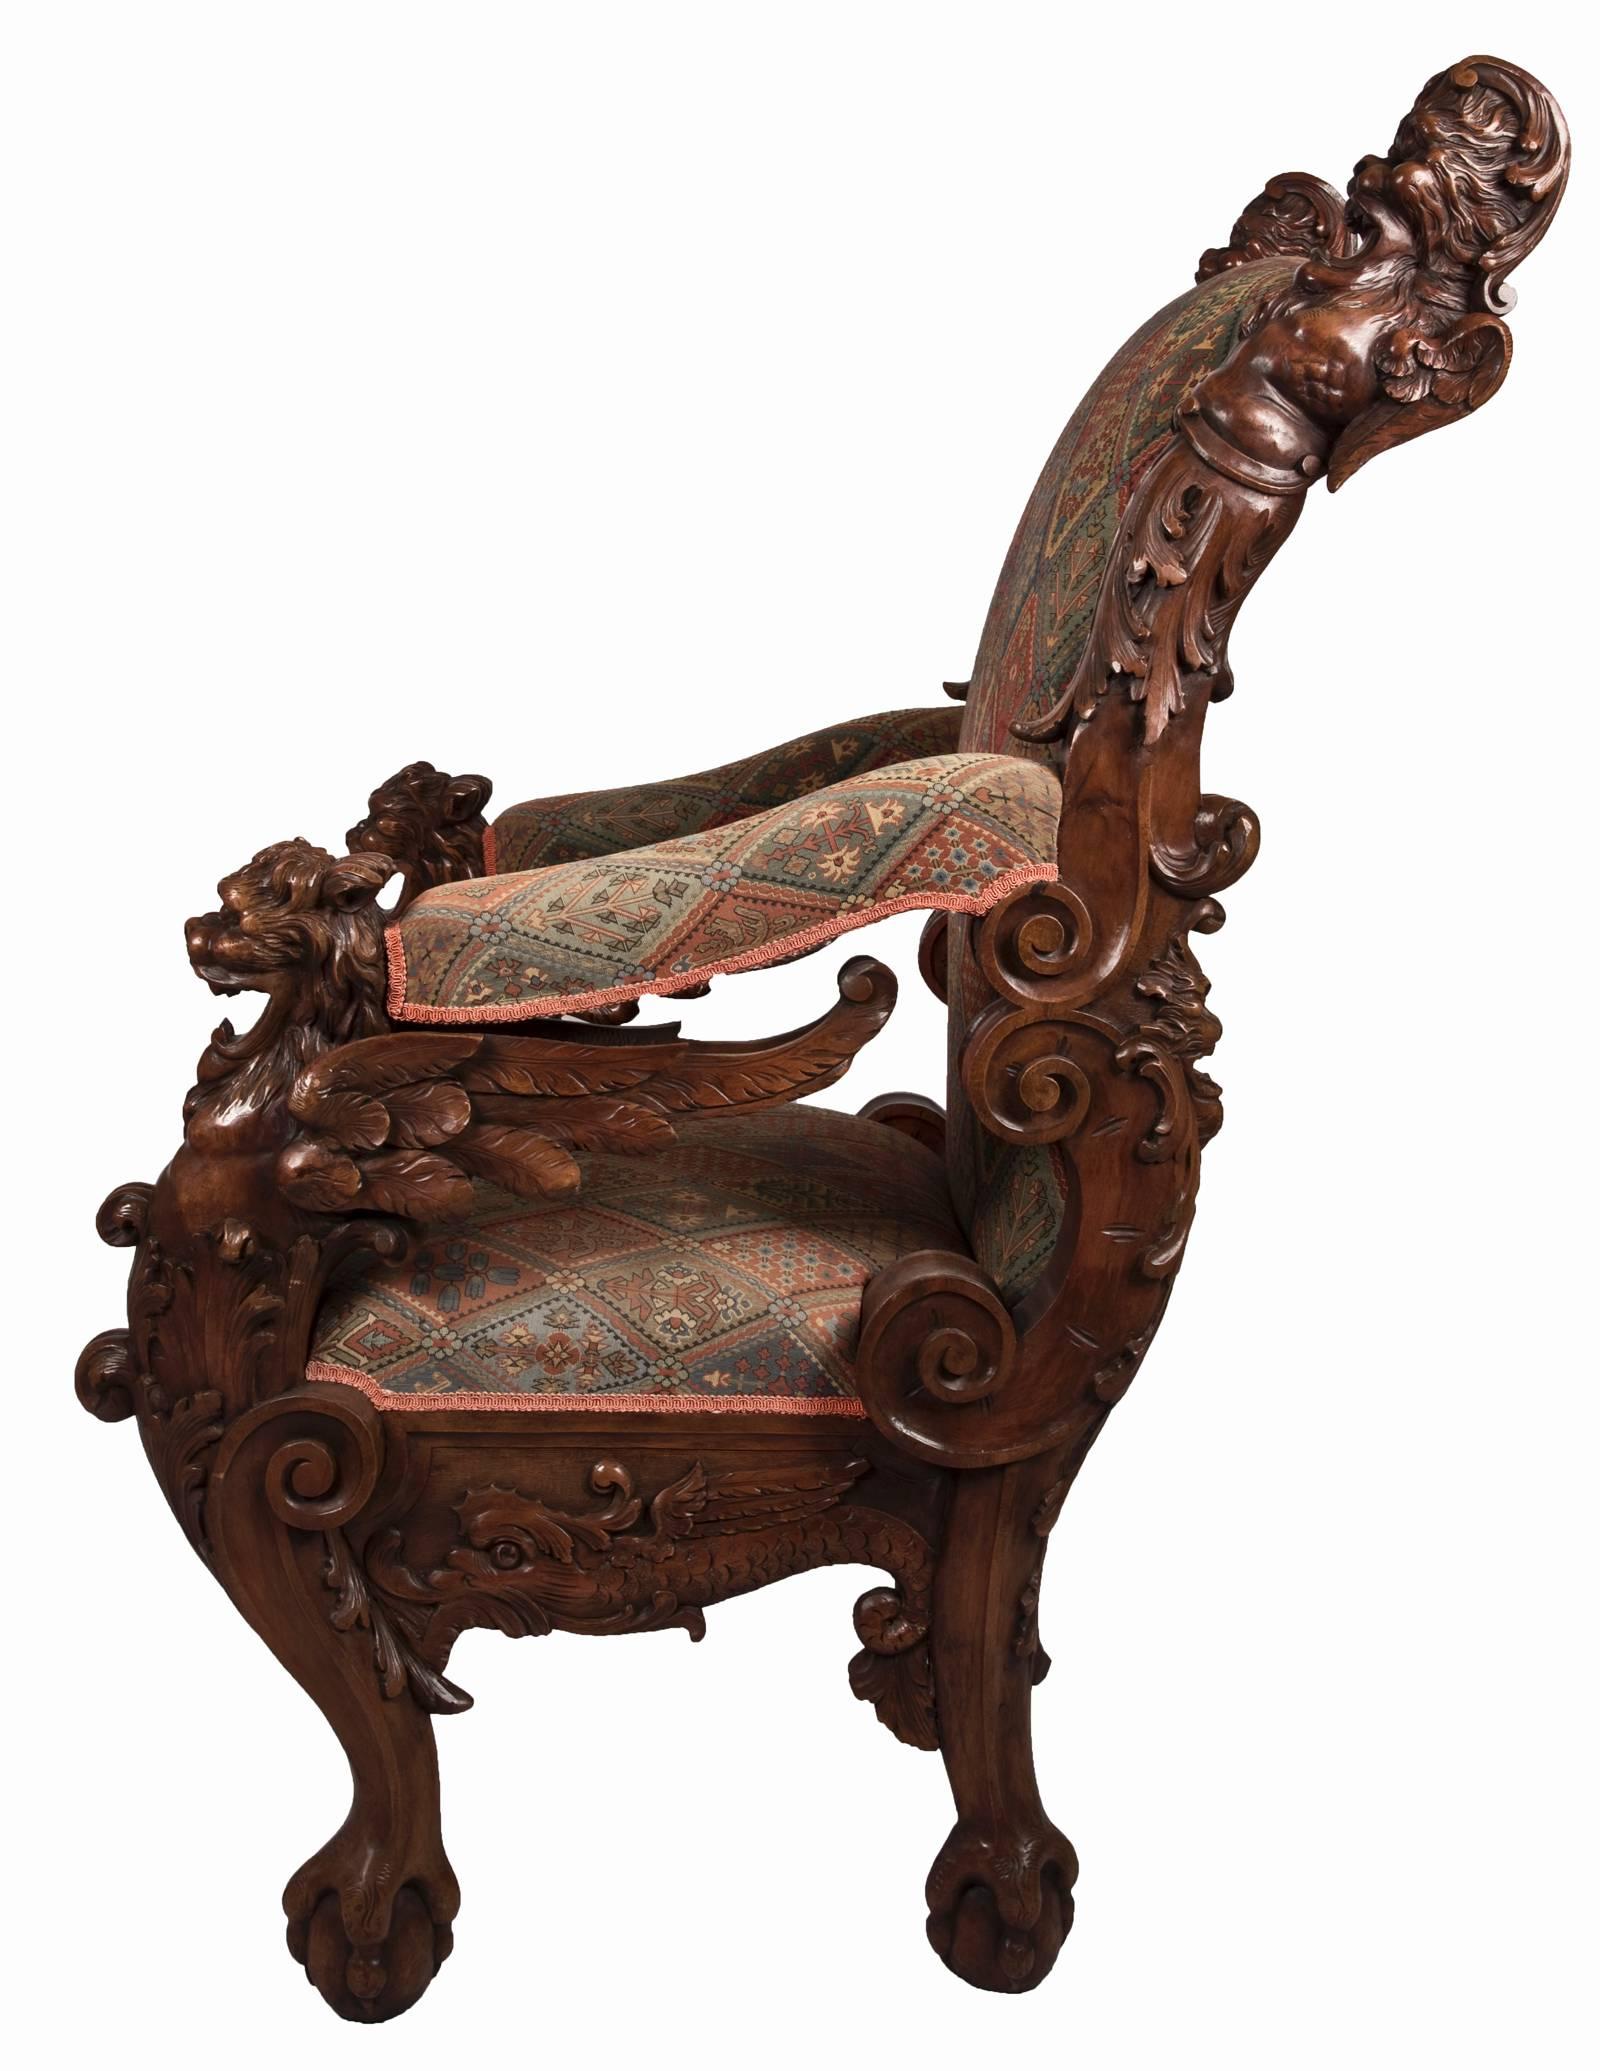 A monumental 19th century German throne chair executed in carved mahogany with upholstered wide seat and high back. This stately chair features carved figural lions at the headrest, deeply carved foliate and C-scroll stiles, with imposing carved